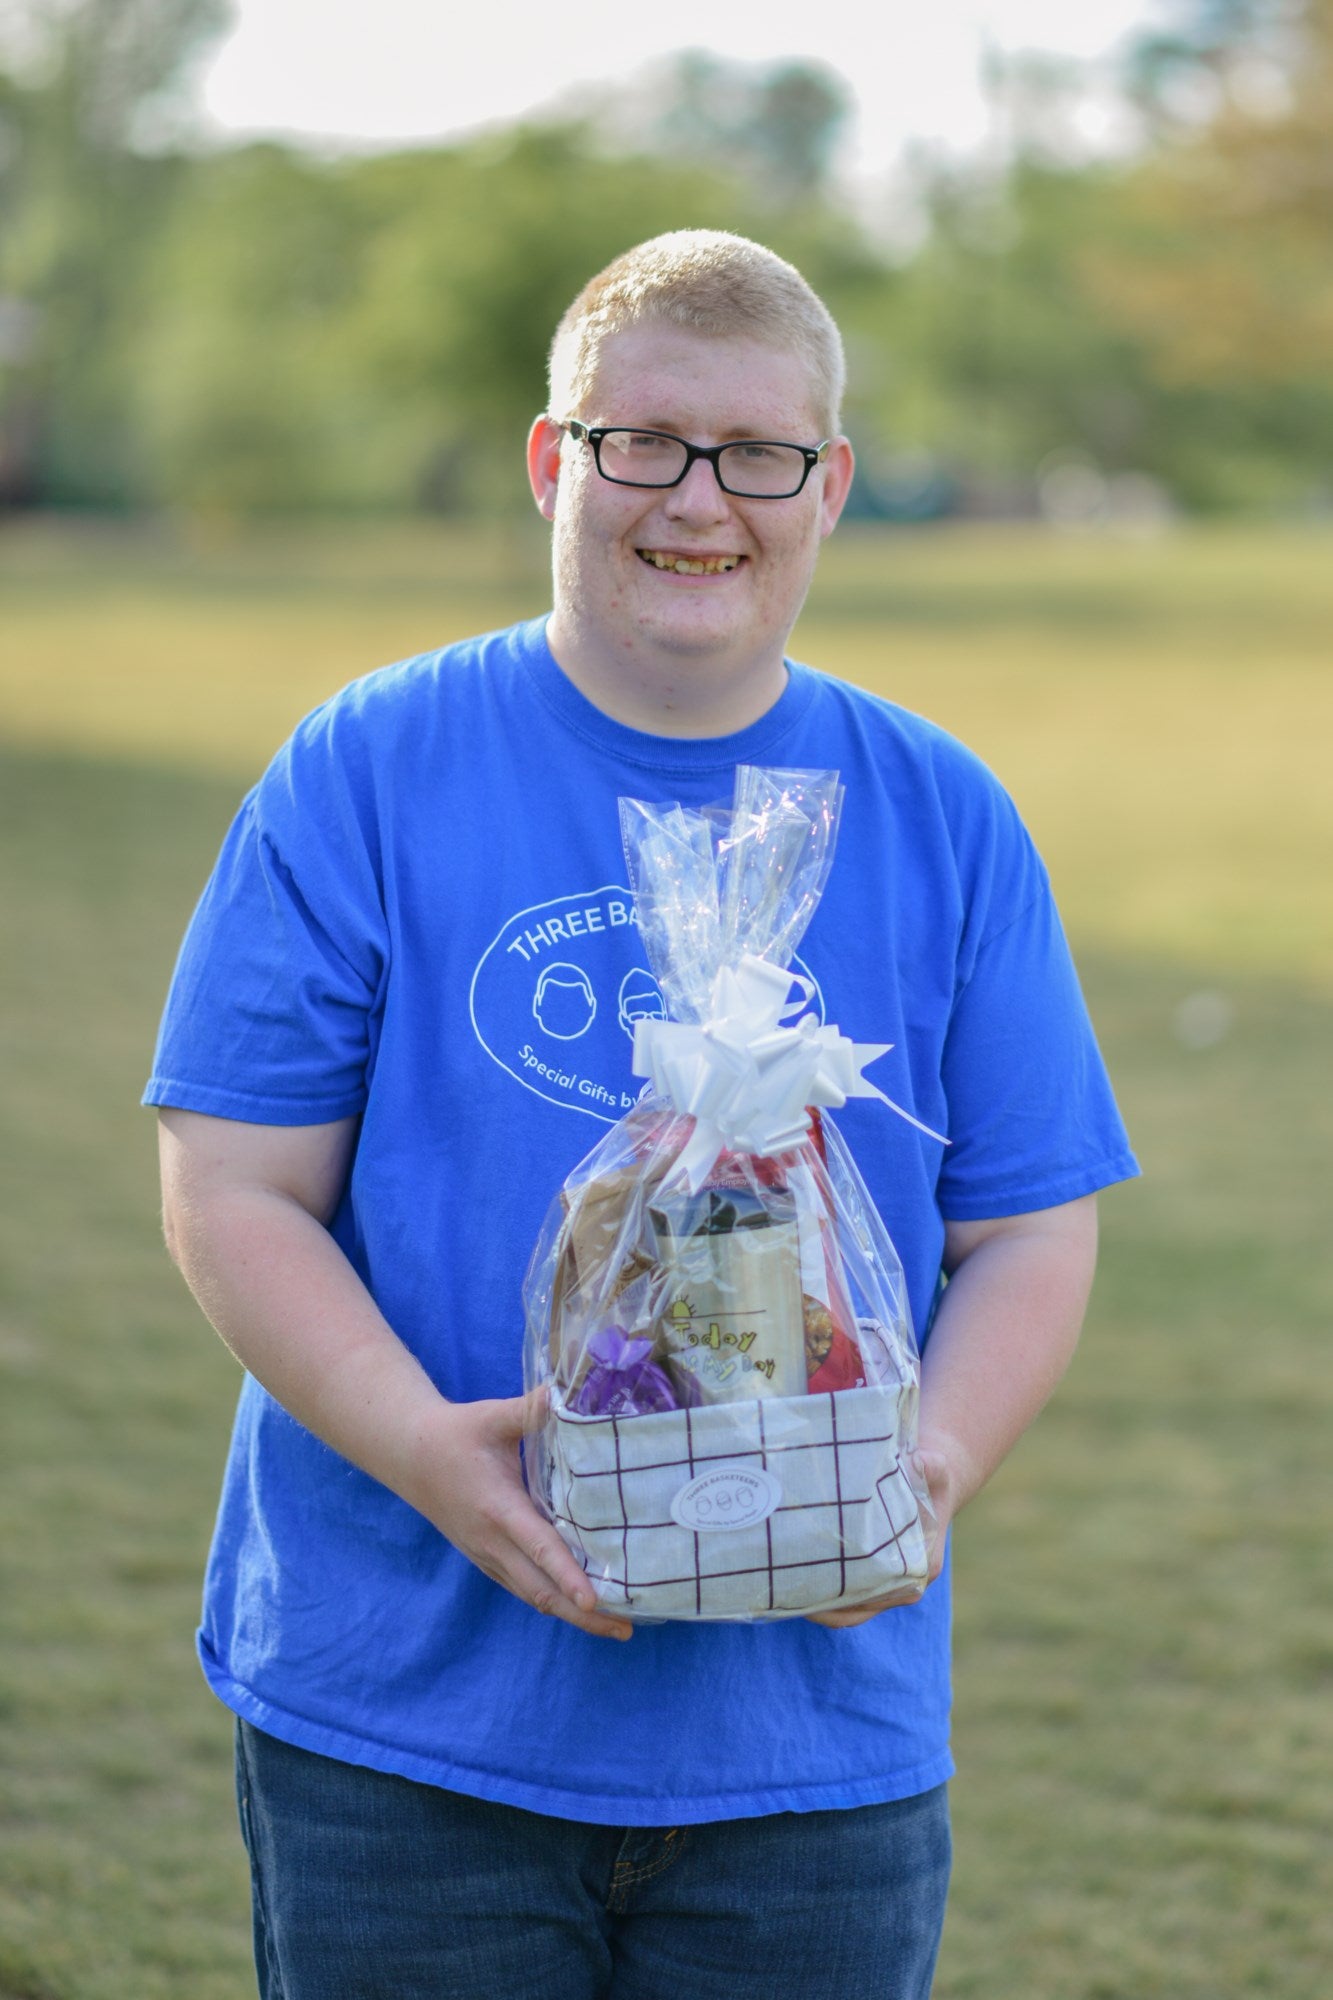 A disabled business owner with a blue shirt and glasses holding a completed "Just Because" gift basket while standing outside